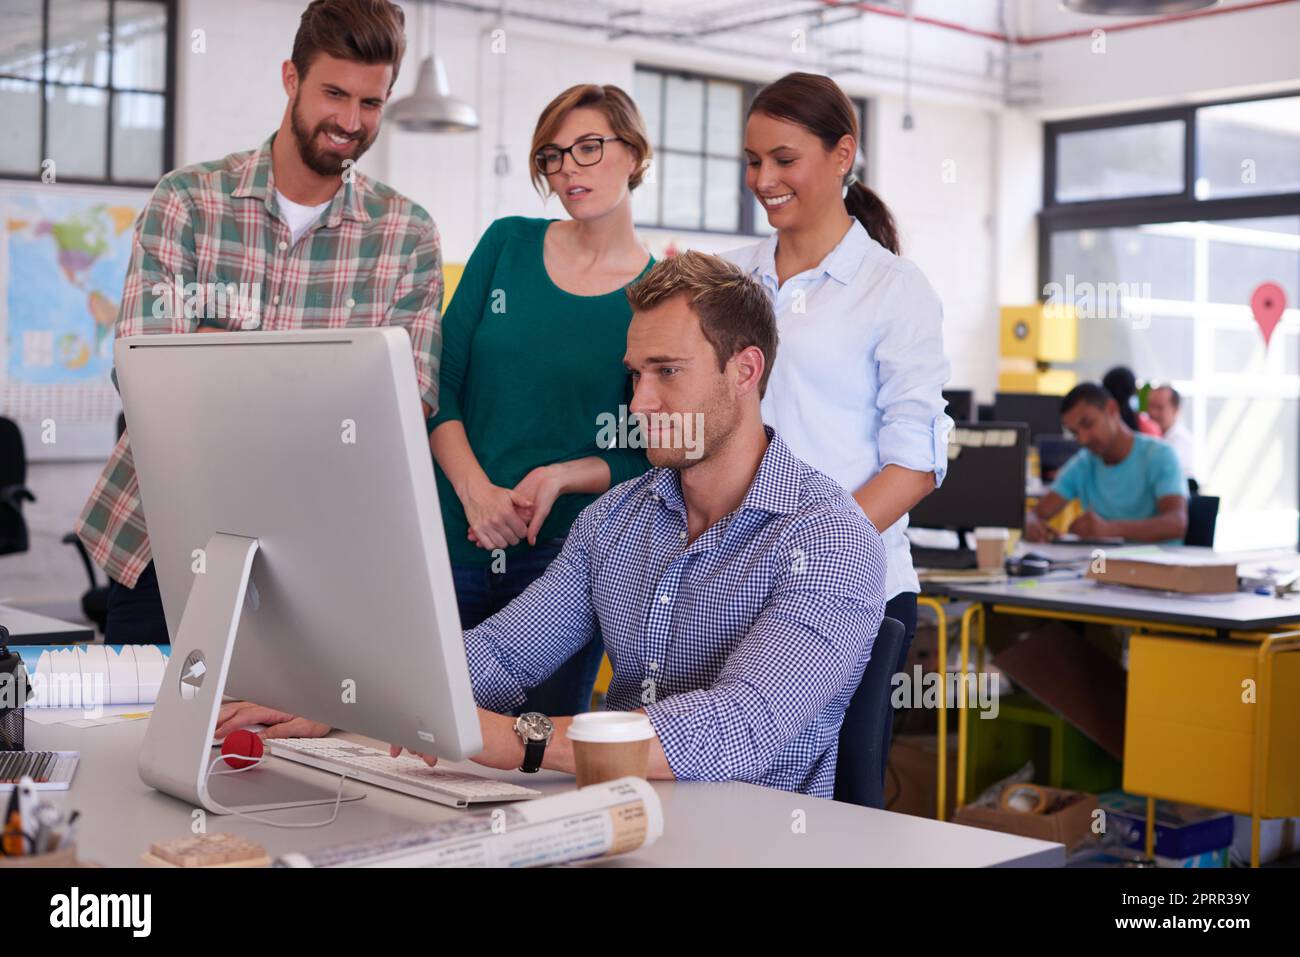 They each have their own ideas. young designers working together in their office. Stock Photo